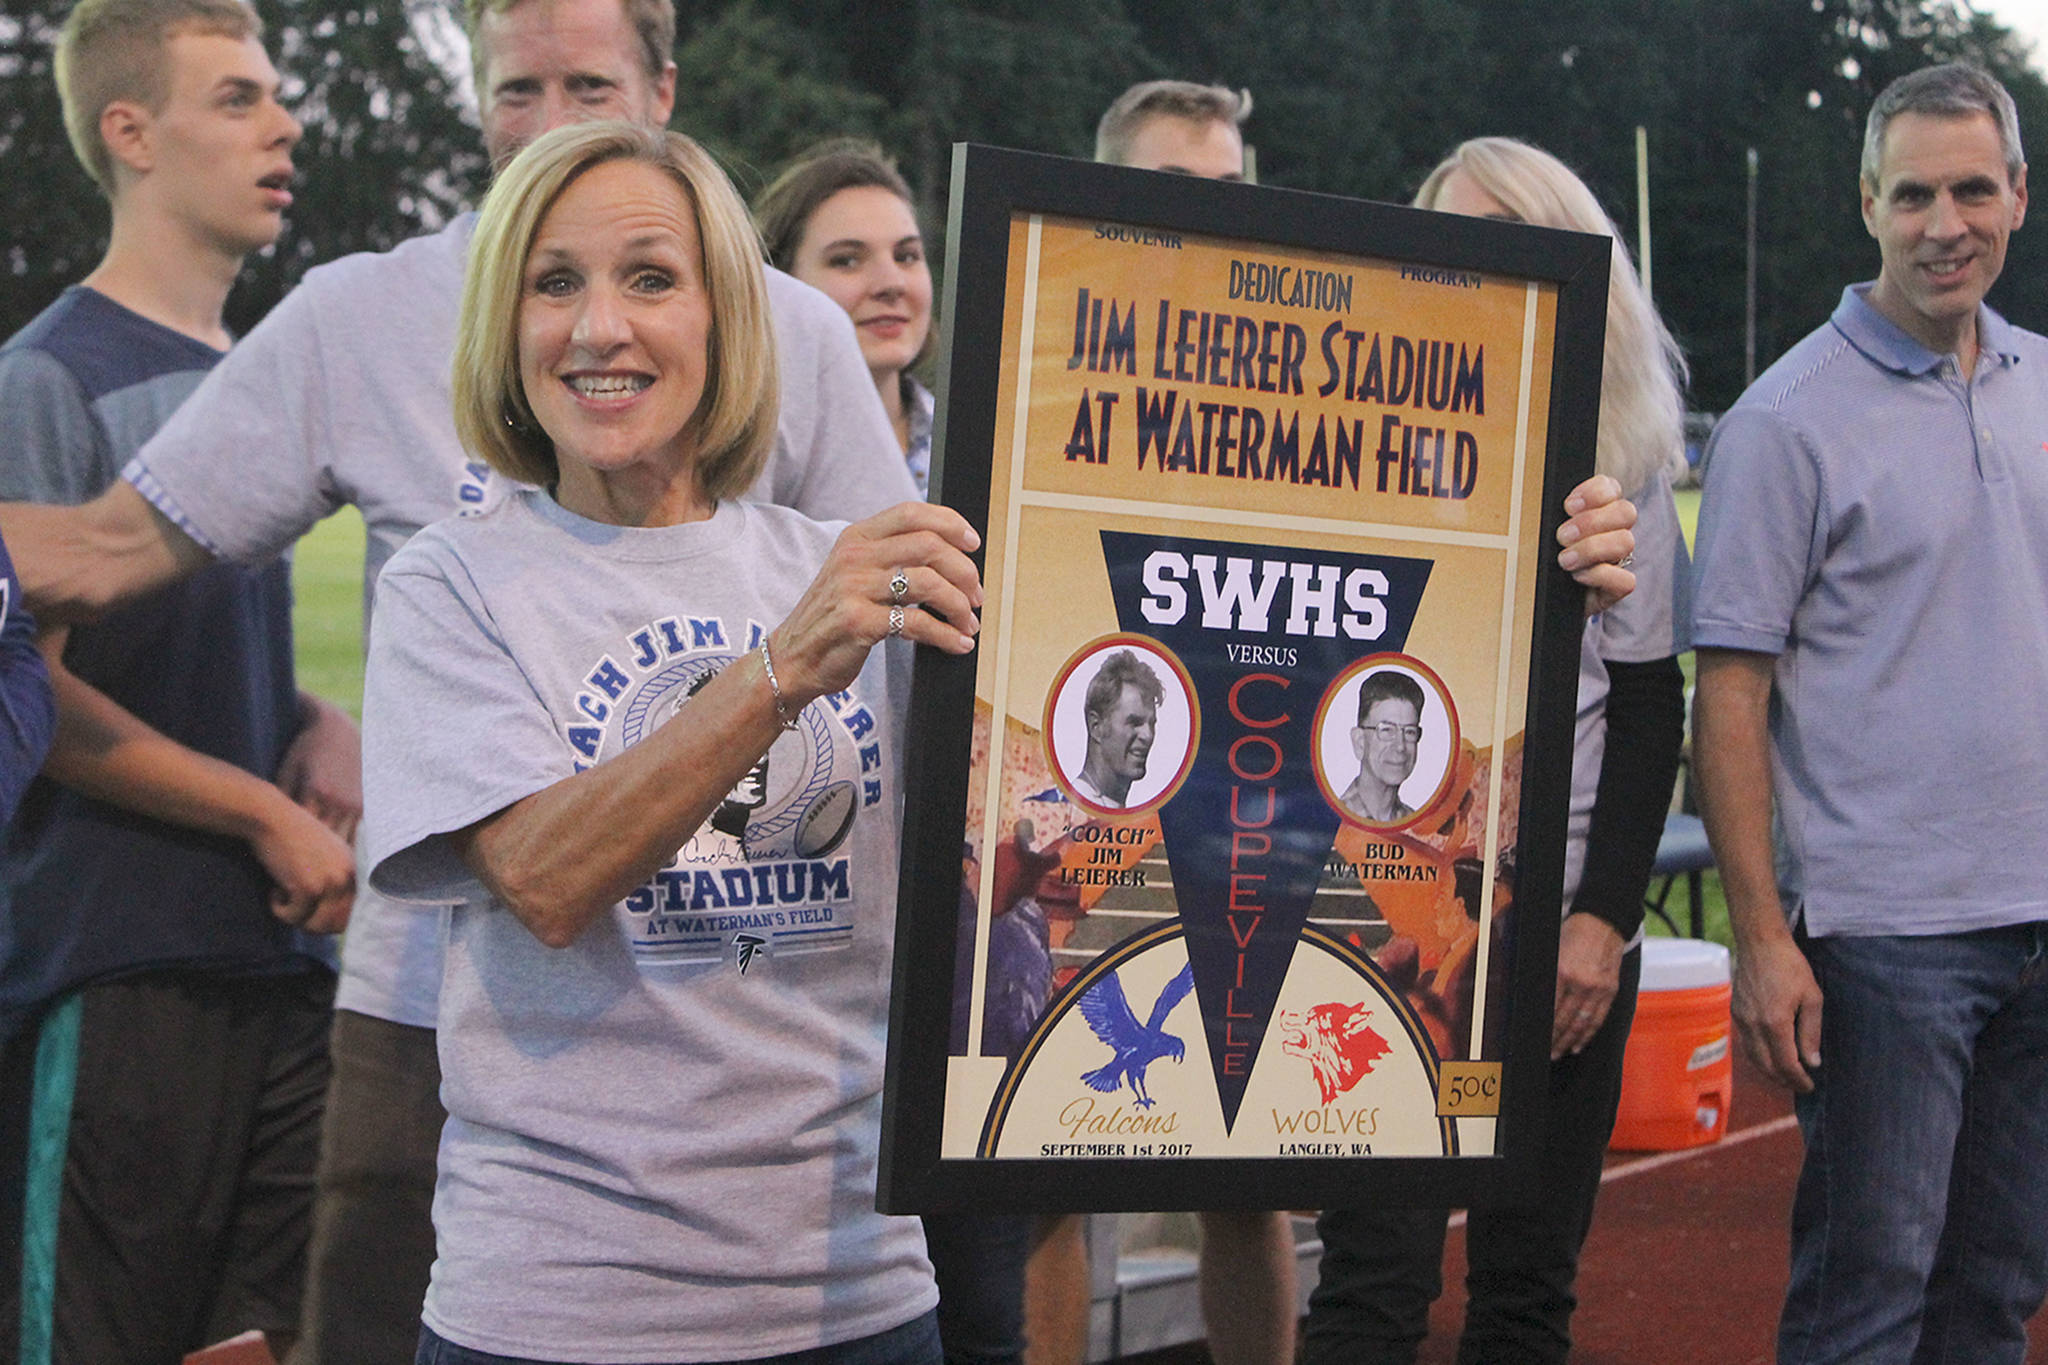 South Whidbey High School’s stadium renamed after Jim ‘Coach’ Leierer